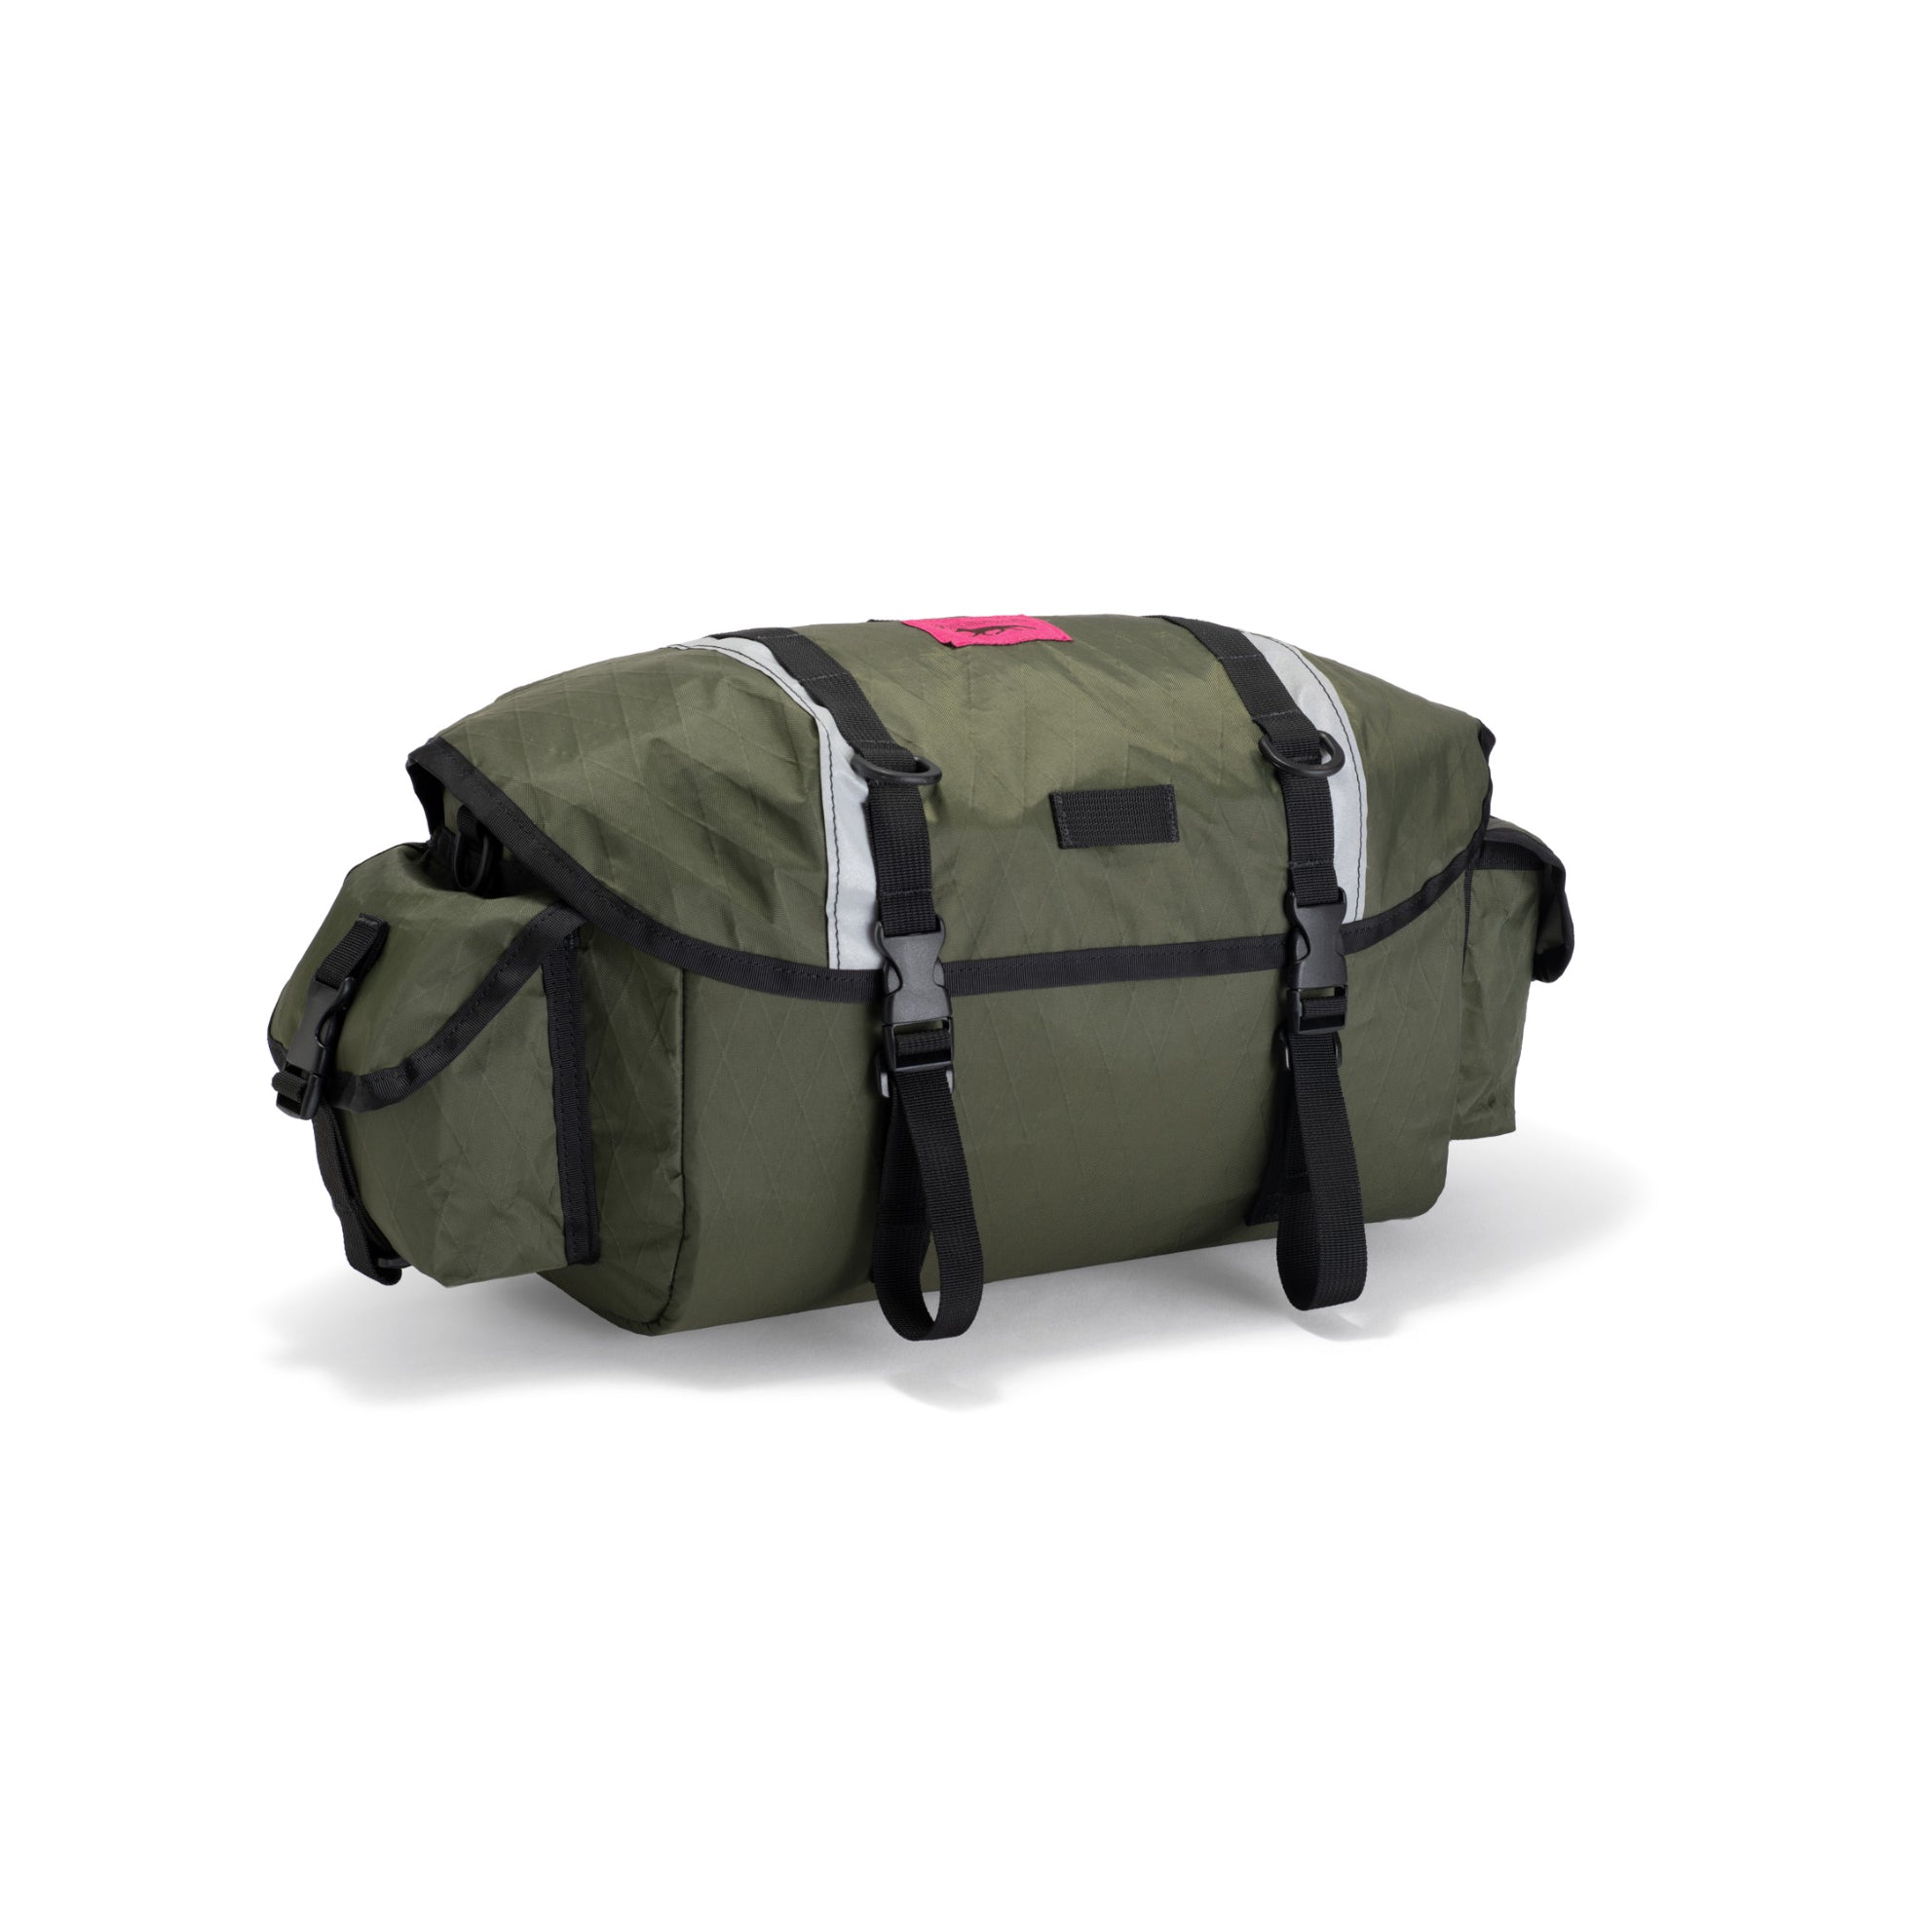 Swift Industries Zeitgeist Pack Review: Bigger on the Inside